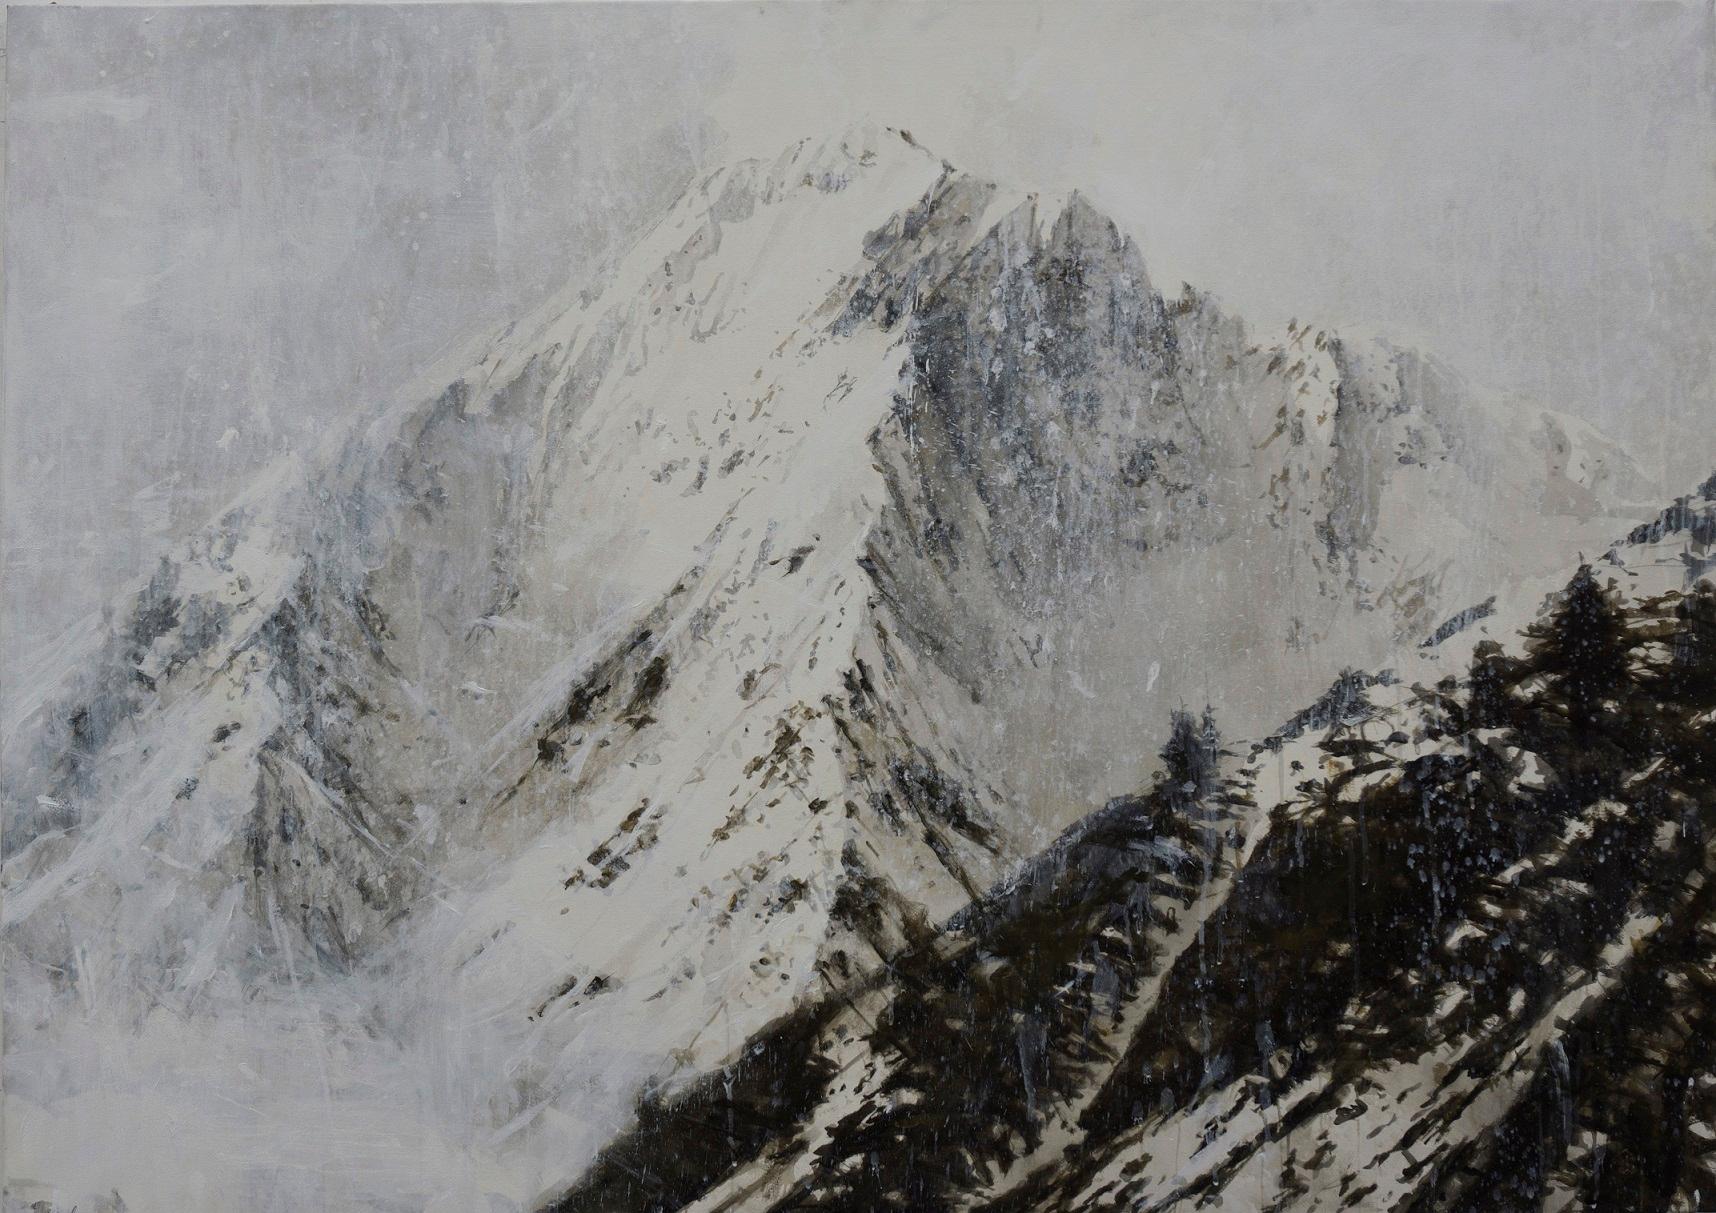 Watercolour Benasque 2 is a painting by Spanish contemporary artist Calo Carratalá.
This work of art represents a mountainous winter landscape in the Pyrenean valley of Bénasque.
Watercolors and acrylics on paper mounted on canvas, 100 x 140